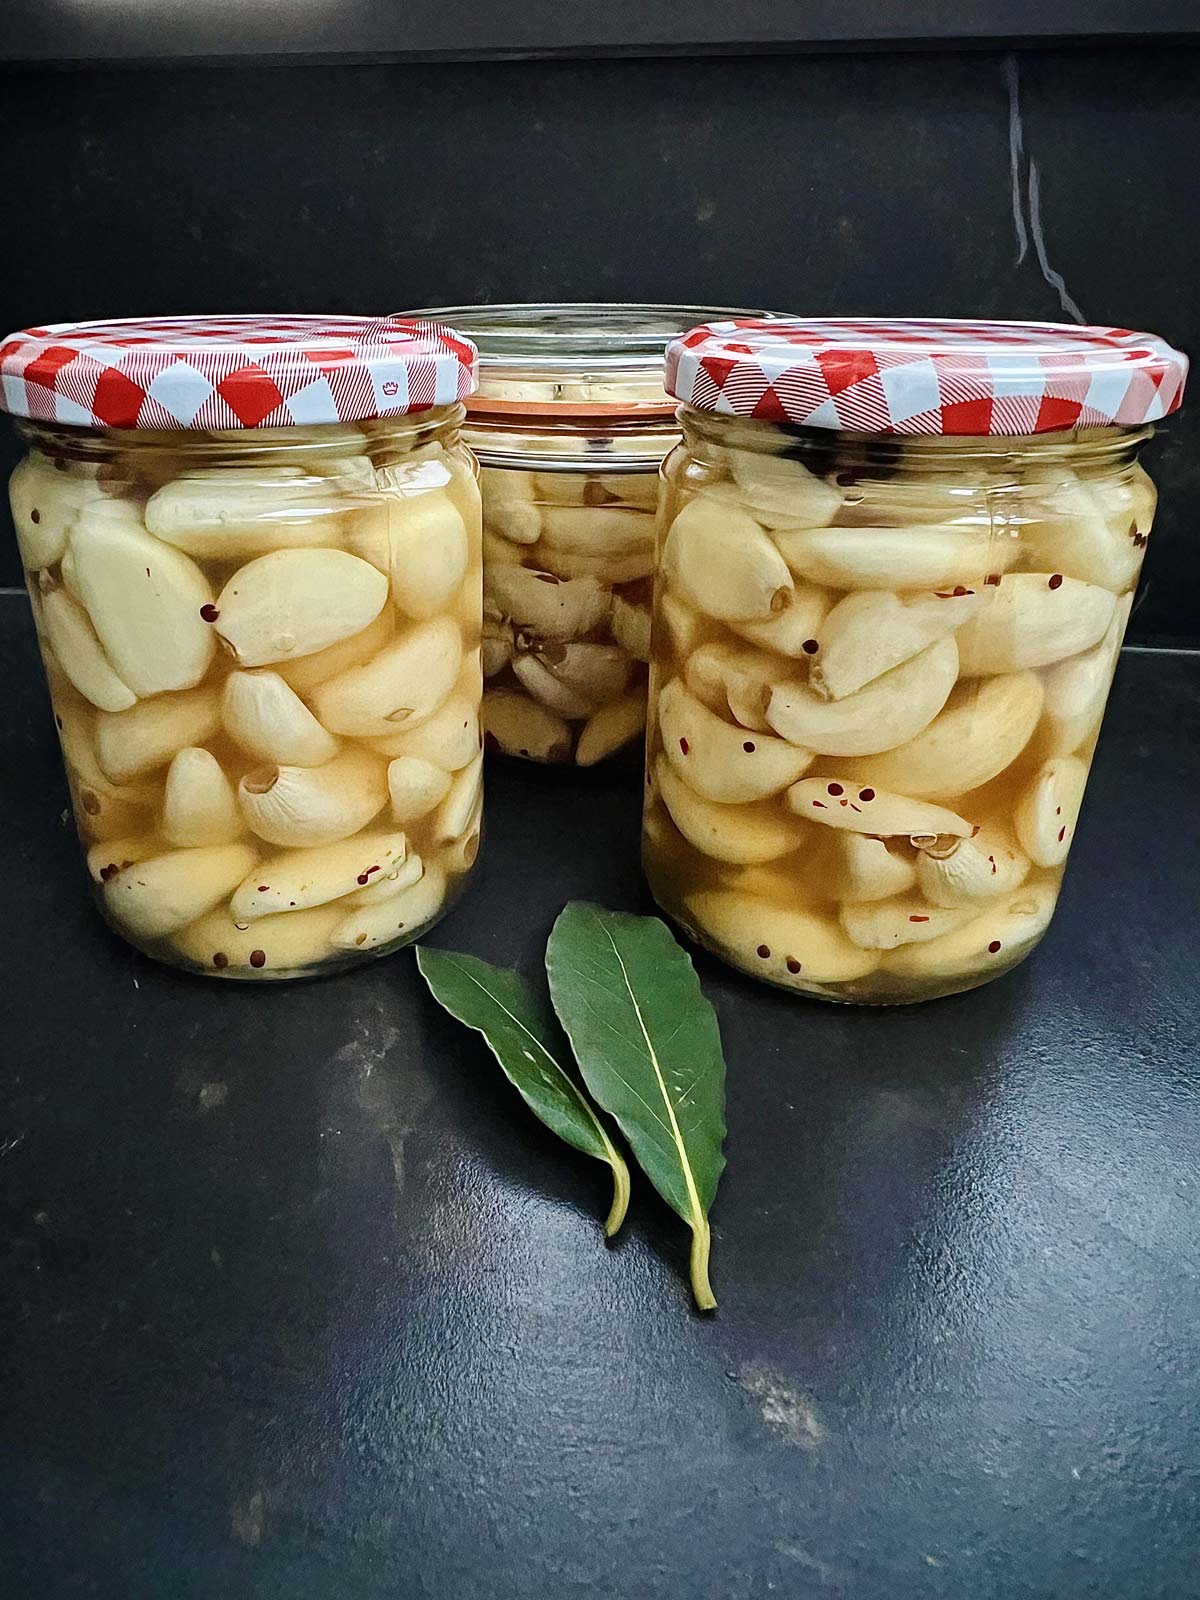 Three jars containing pickled garlic on a dark worktop and 2 bay leaves.